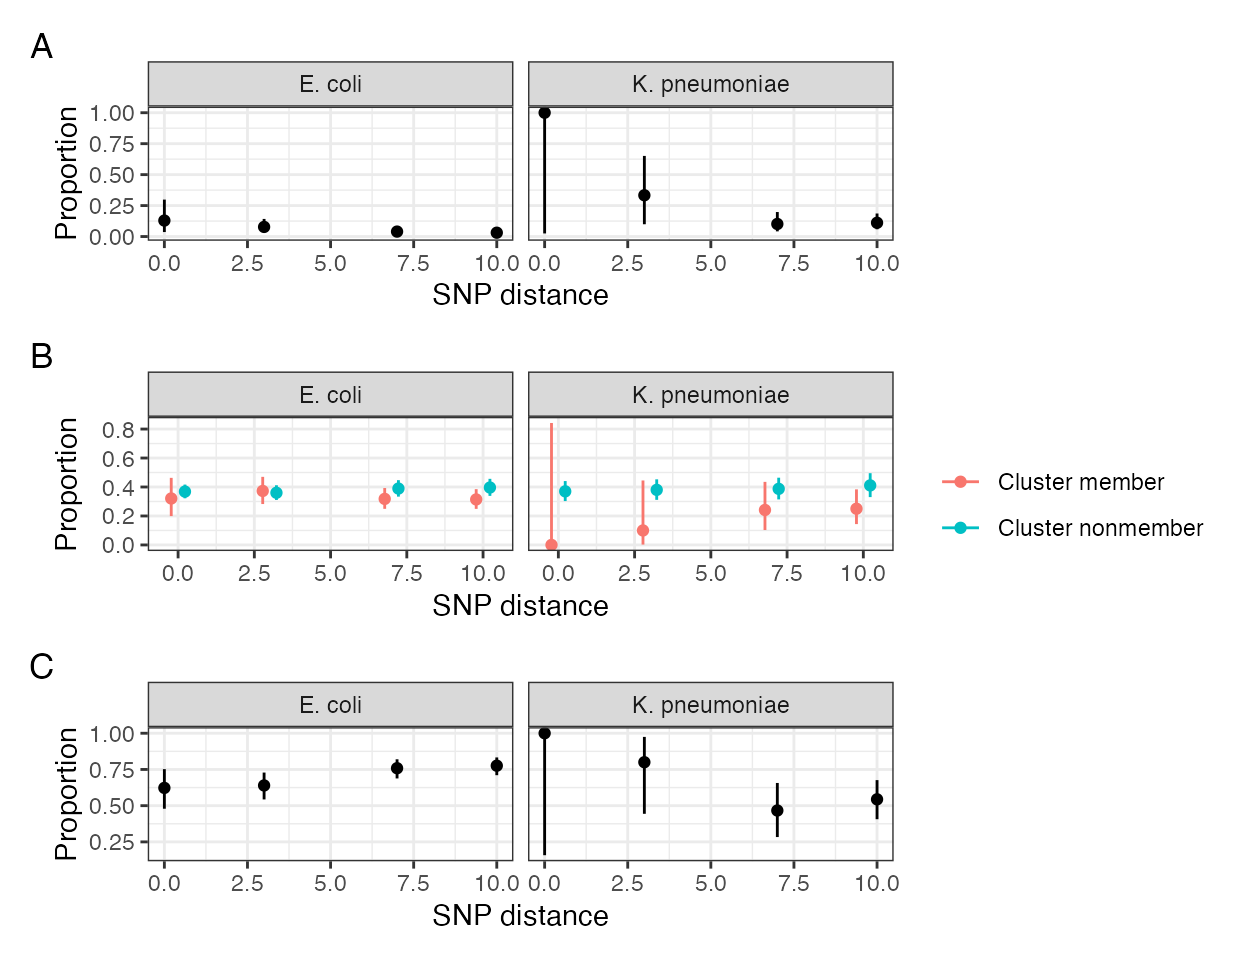 Sensitivity analysis examining epidemiology of SNP-clusters (i.e. putative transmission clusters) as the SNP-threshold varies from 0 to 10. (A) shows the proportion of pairwise comparisons of within-SNP-cluster isolates that are within a single participant; most putative transmission clusters are between-, rather than within- participants. (B) shows the proportion of isolates that are community associated stratified by whether they are members of a putative transmission cluster or not; the proportion is similar at all threshold values, which is not suggestive of hospital-associated transmission.